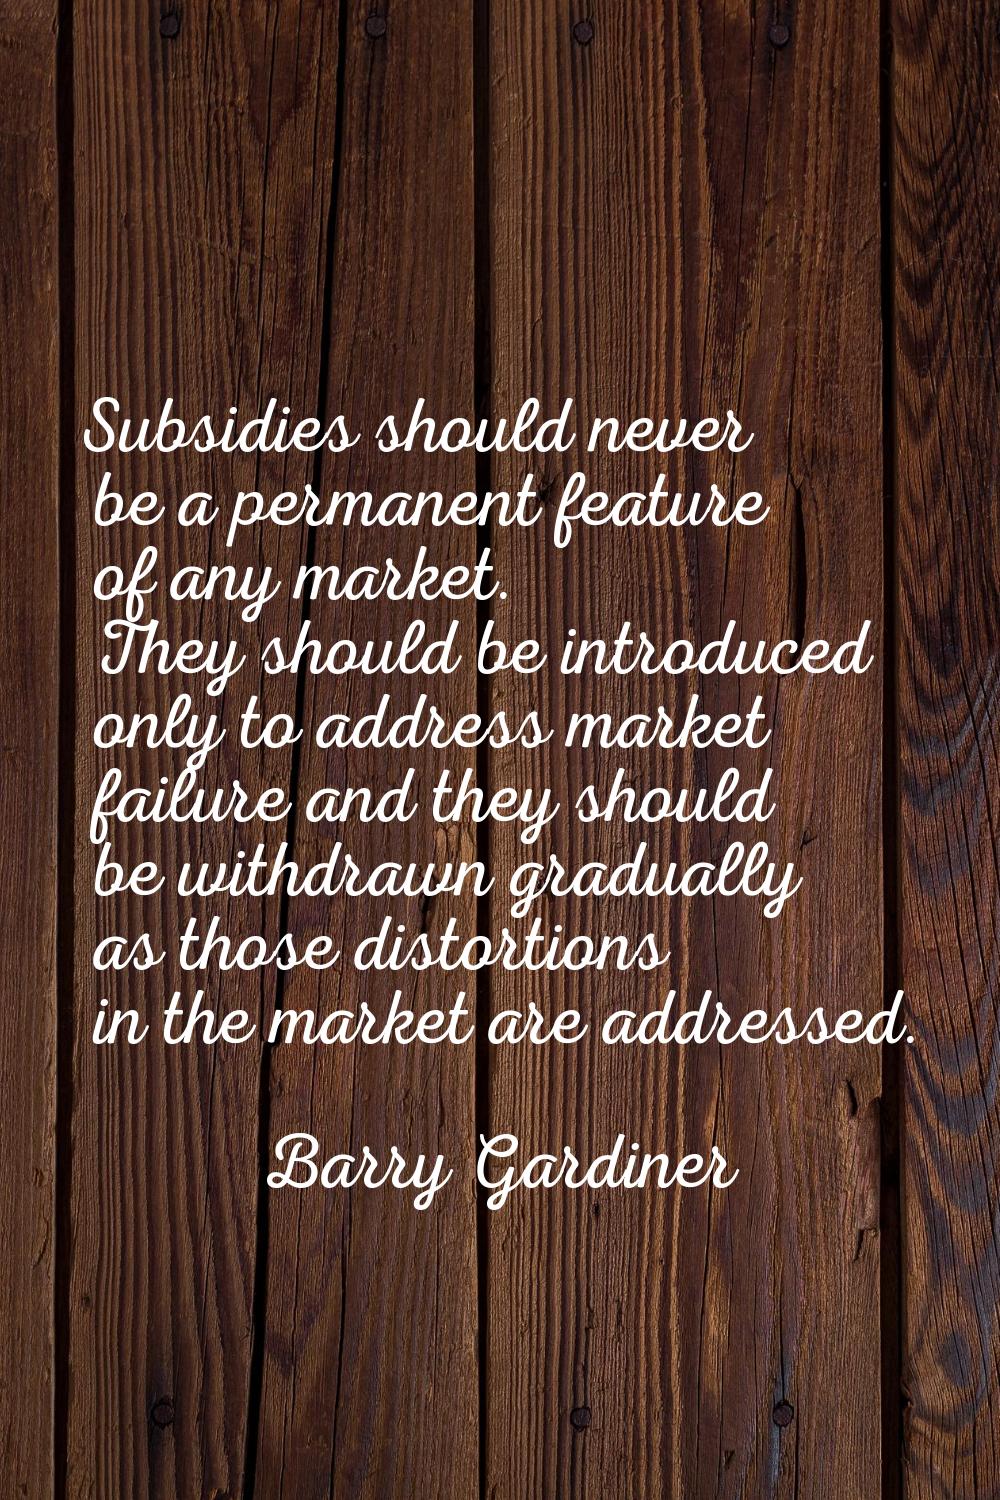 Subsidies should never be a permanent feature of any market. They should be introduced only to addr